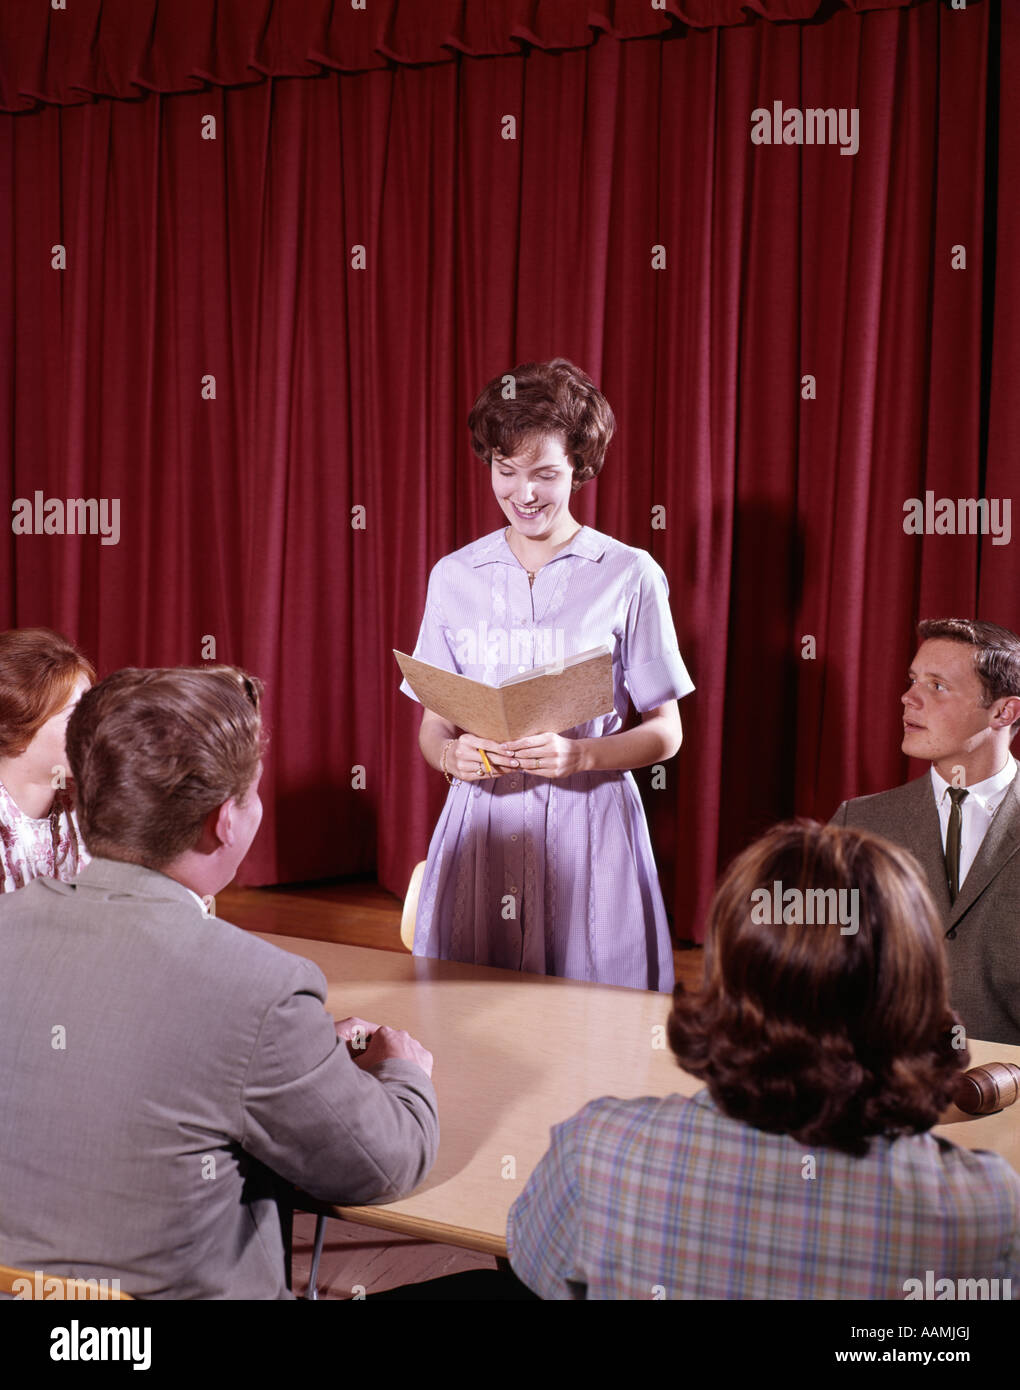 1960s TEEN STUDENTS AT CONFERENCE TABLE IN FRONT OF RED VELVET CURTAIN GIRL OPEN FOLDER SPEAK STUDENT GOVERNMENT COUNCIL Stock Photo